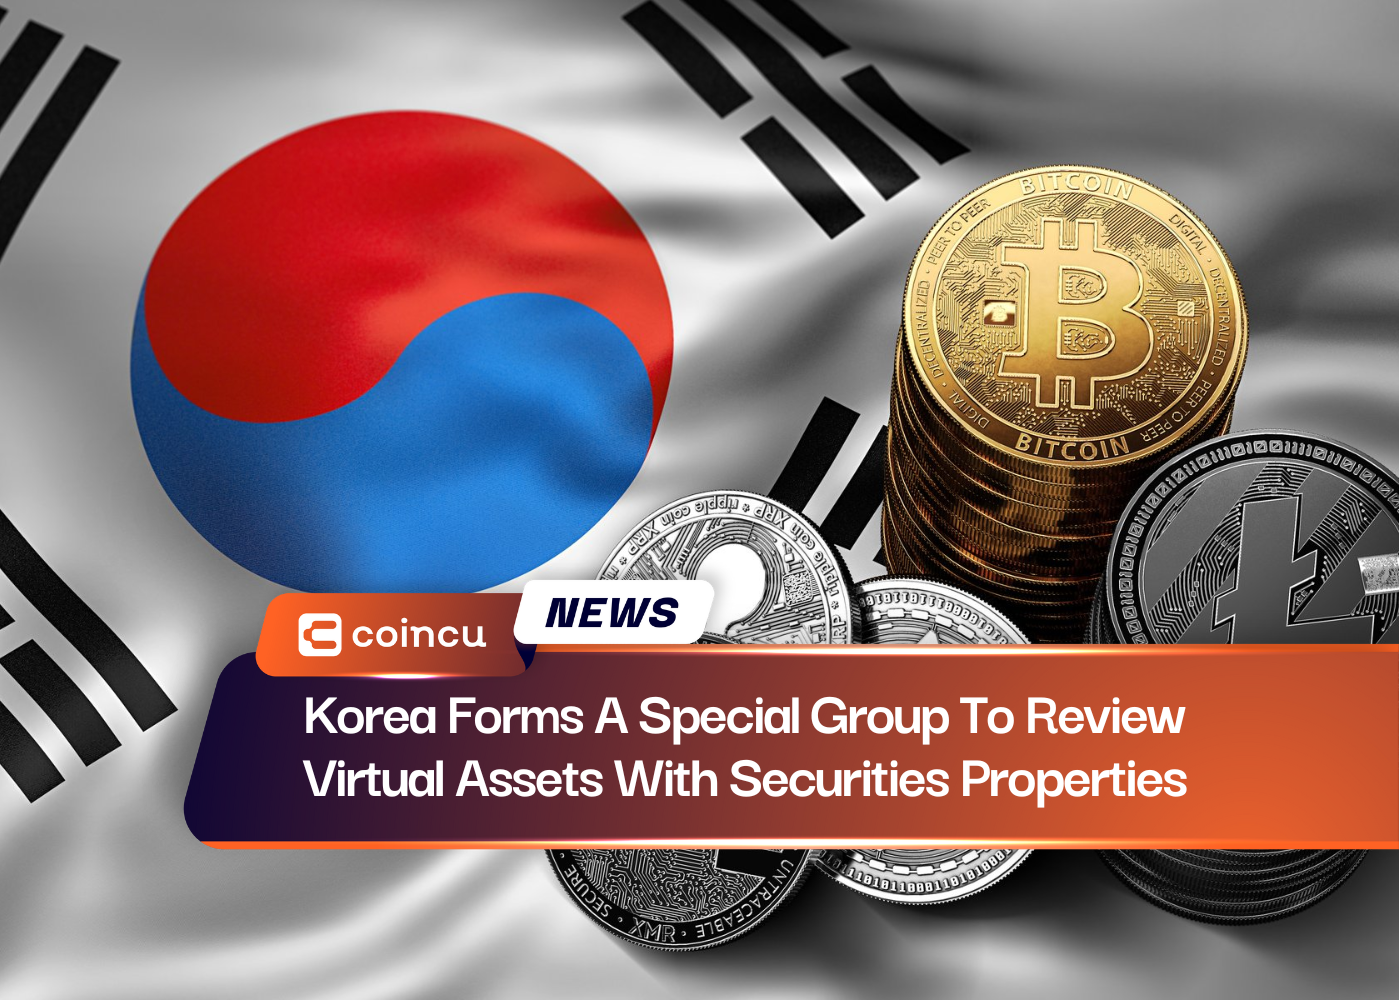 Korea Forms A Special Group To Review Virtual Assets With Securities Properties